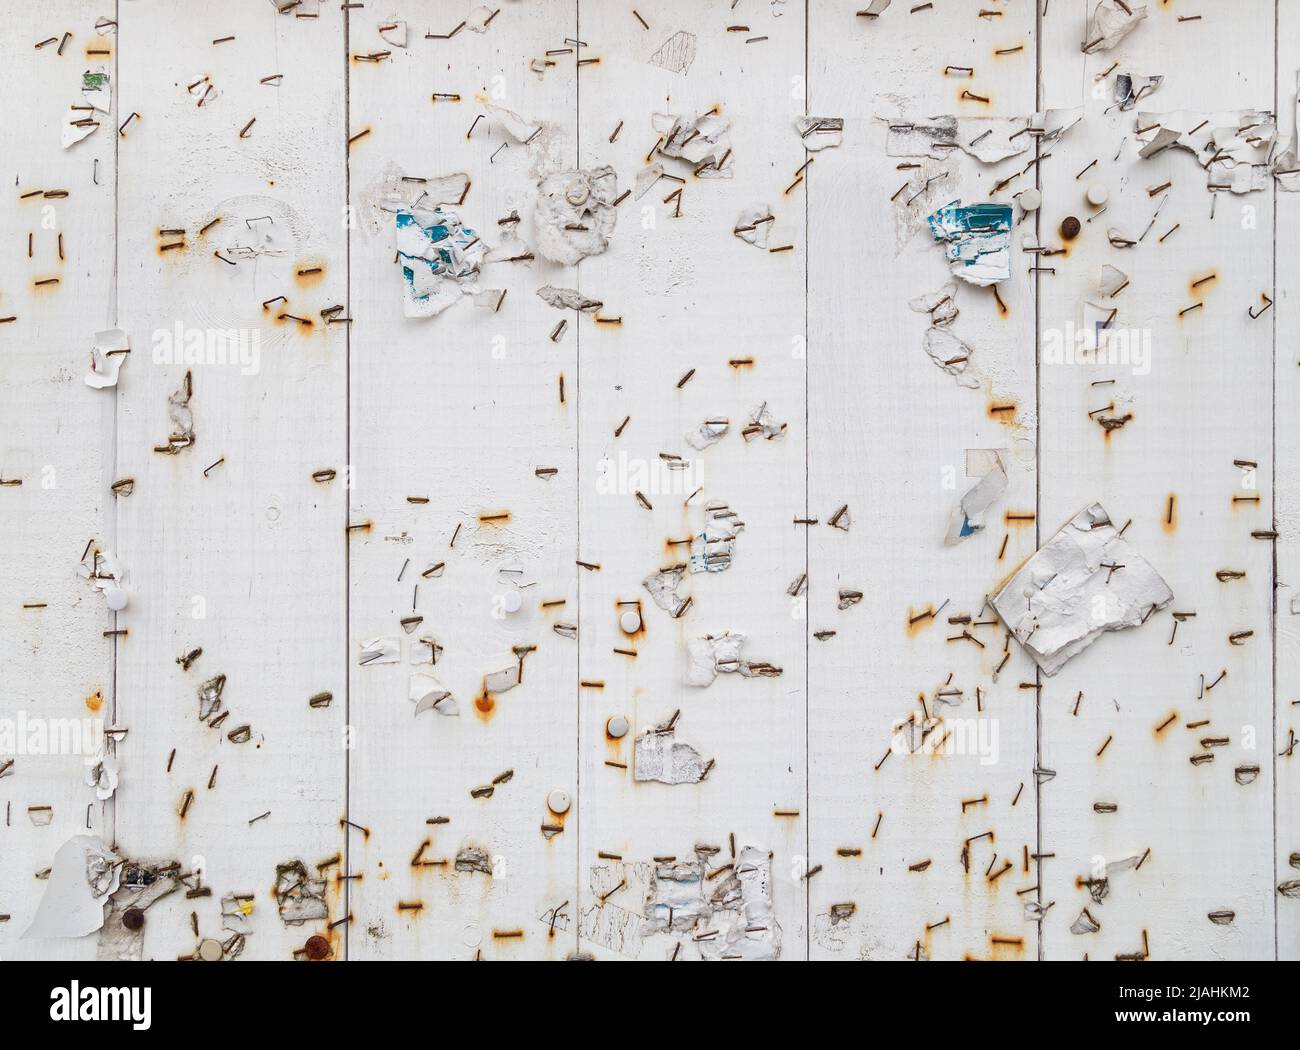 Many rusty stapler pins and pieces of paper on a messy white wooden bulletin, message or notice board. Front view. Abstract textured background. Stock Photo